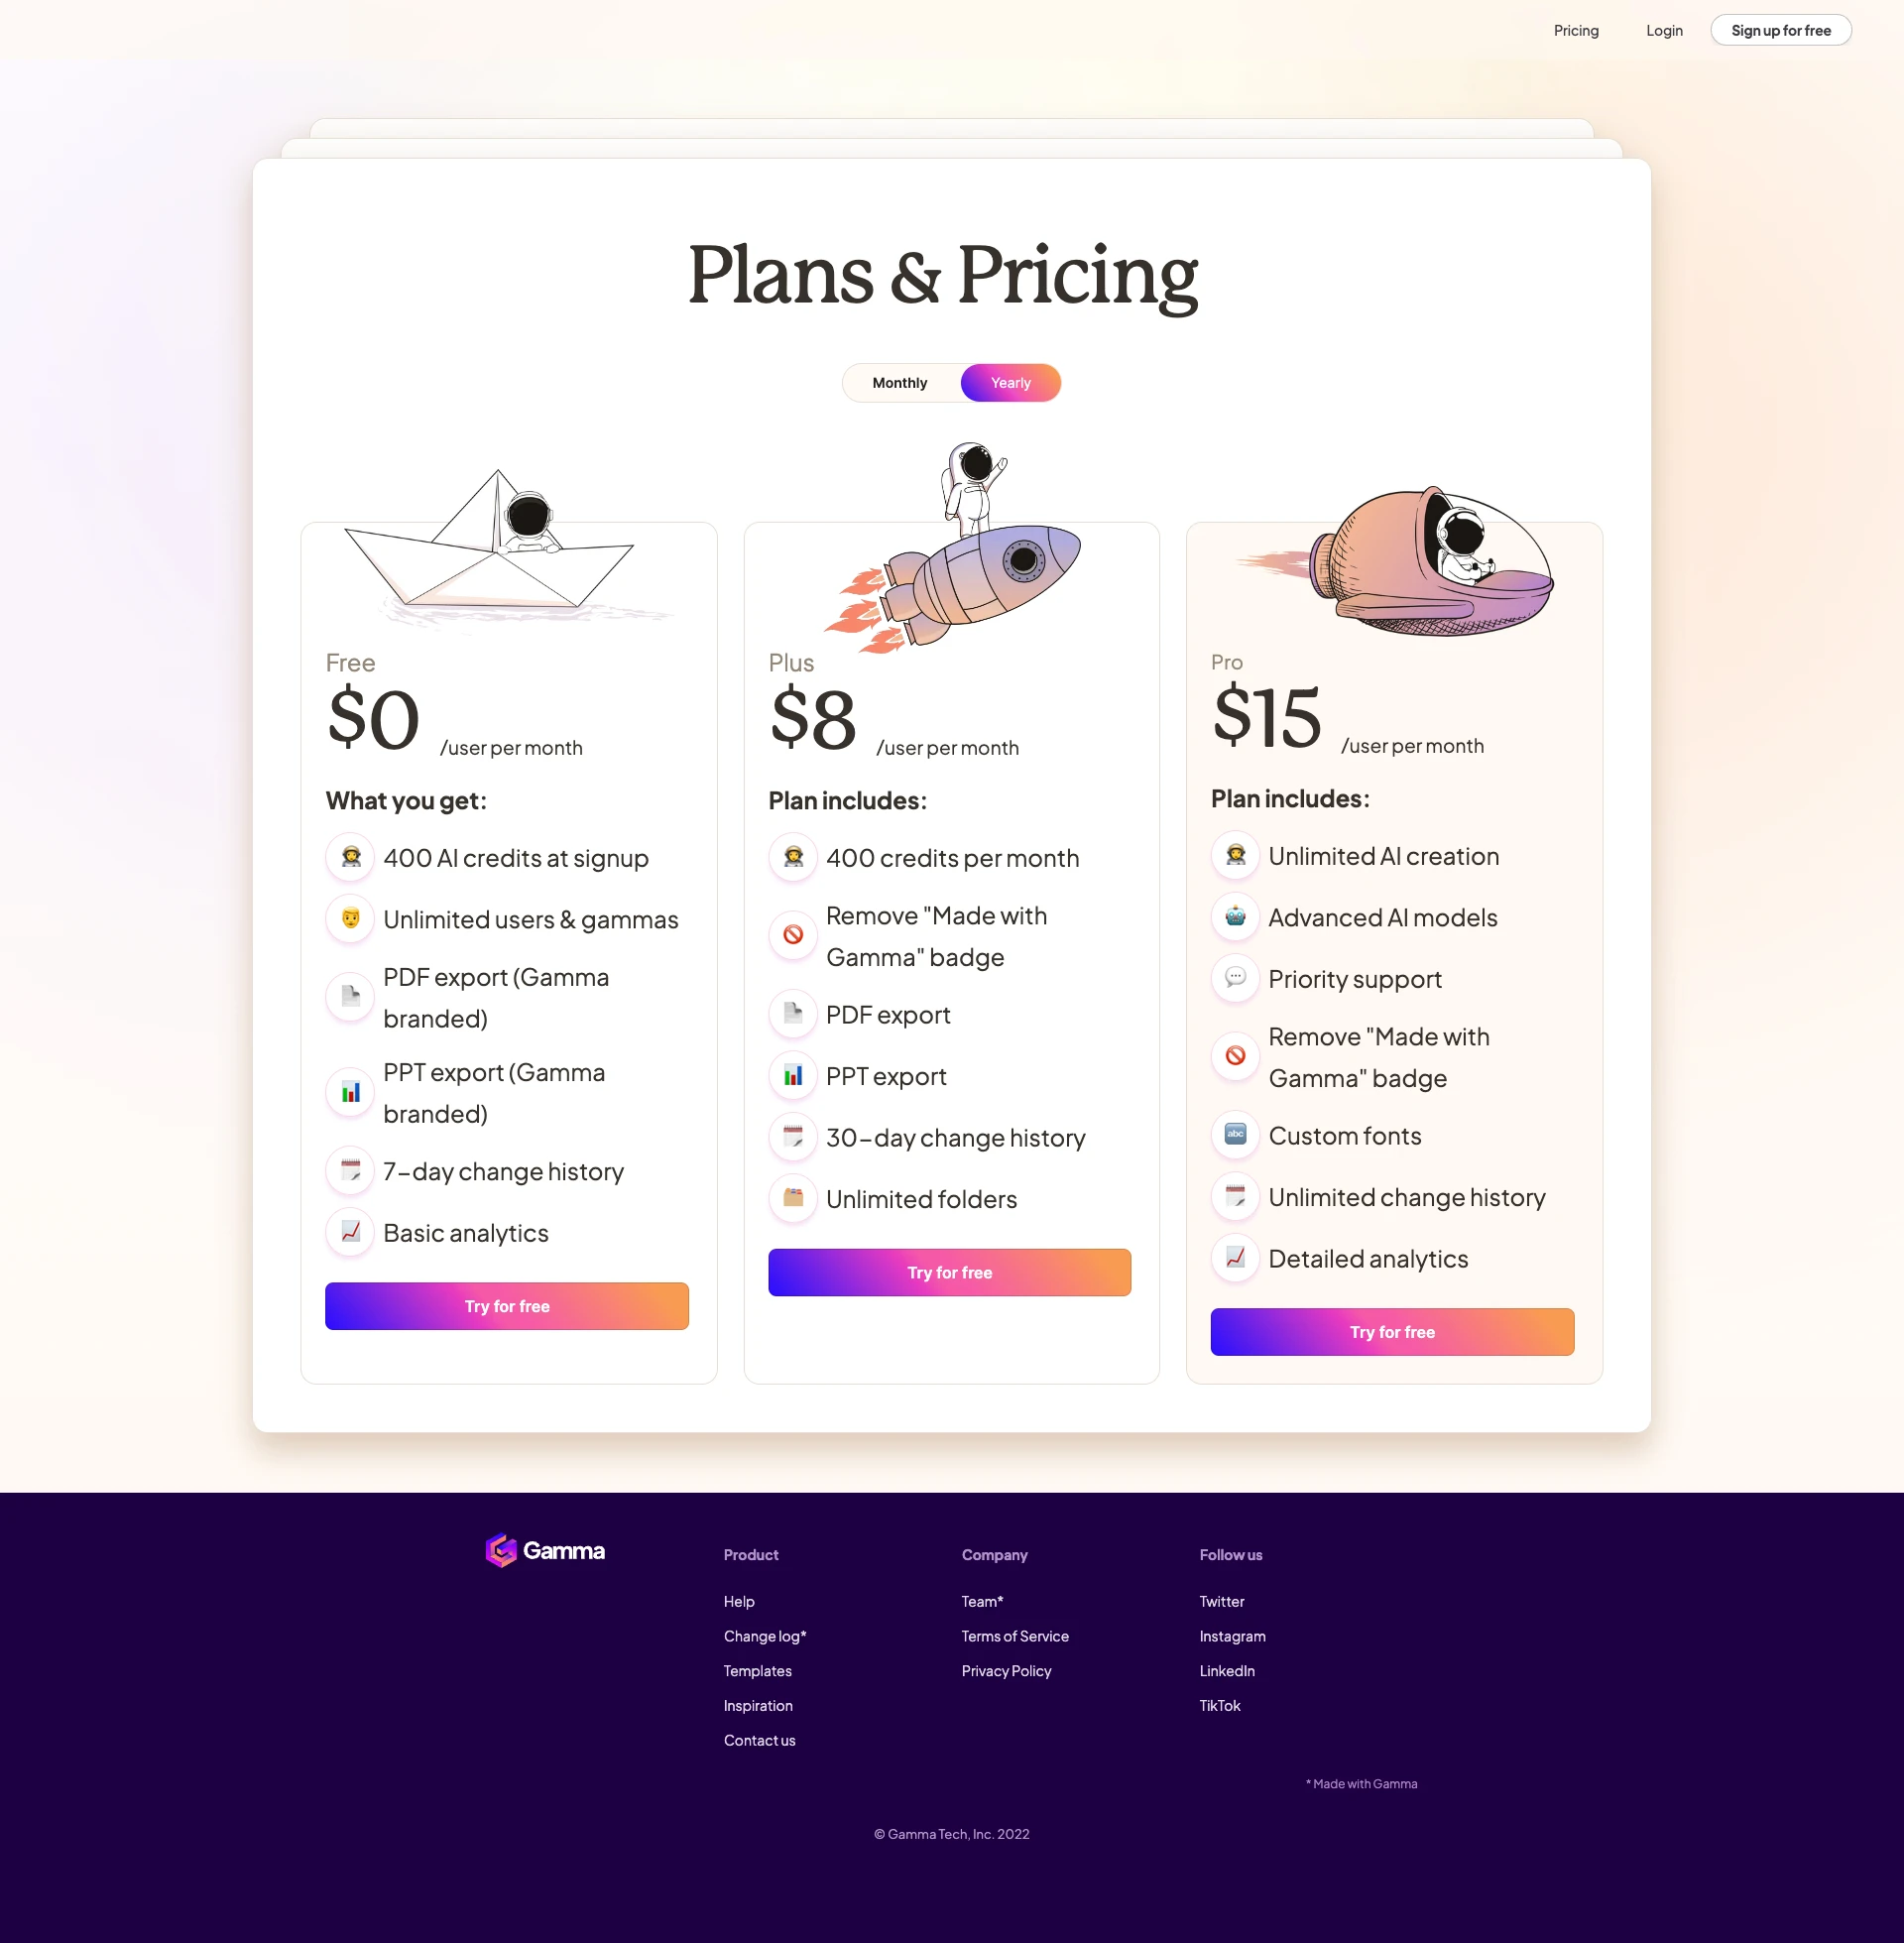 Gamma Landing Page Example: A new medium for presenting ideas, powered by AI. Create beautiful, engaging content with none of the formatting and design work.